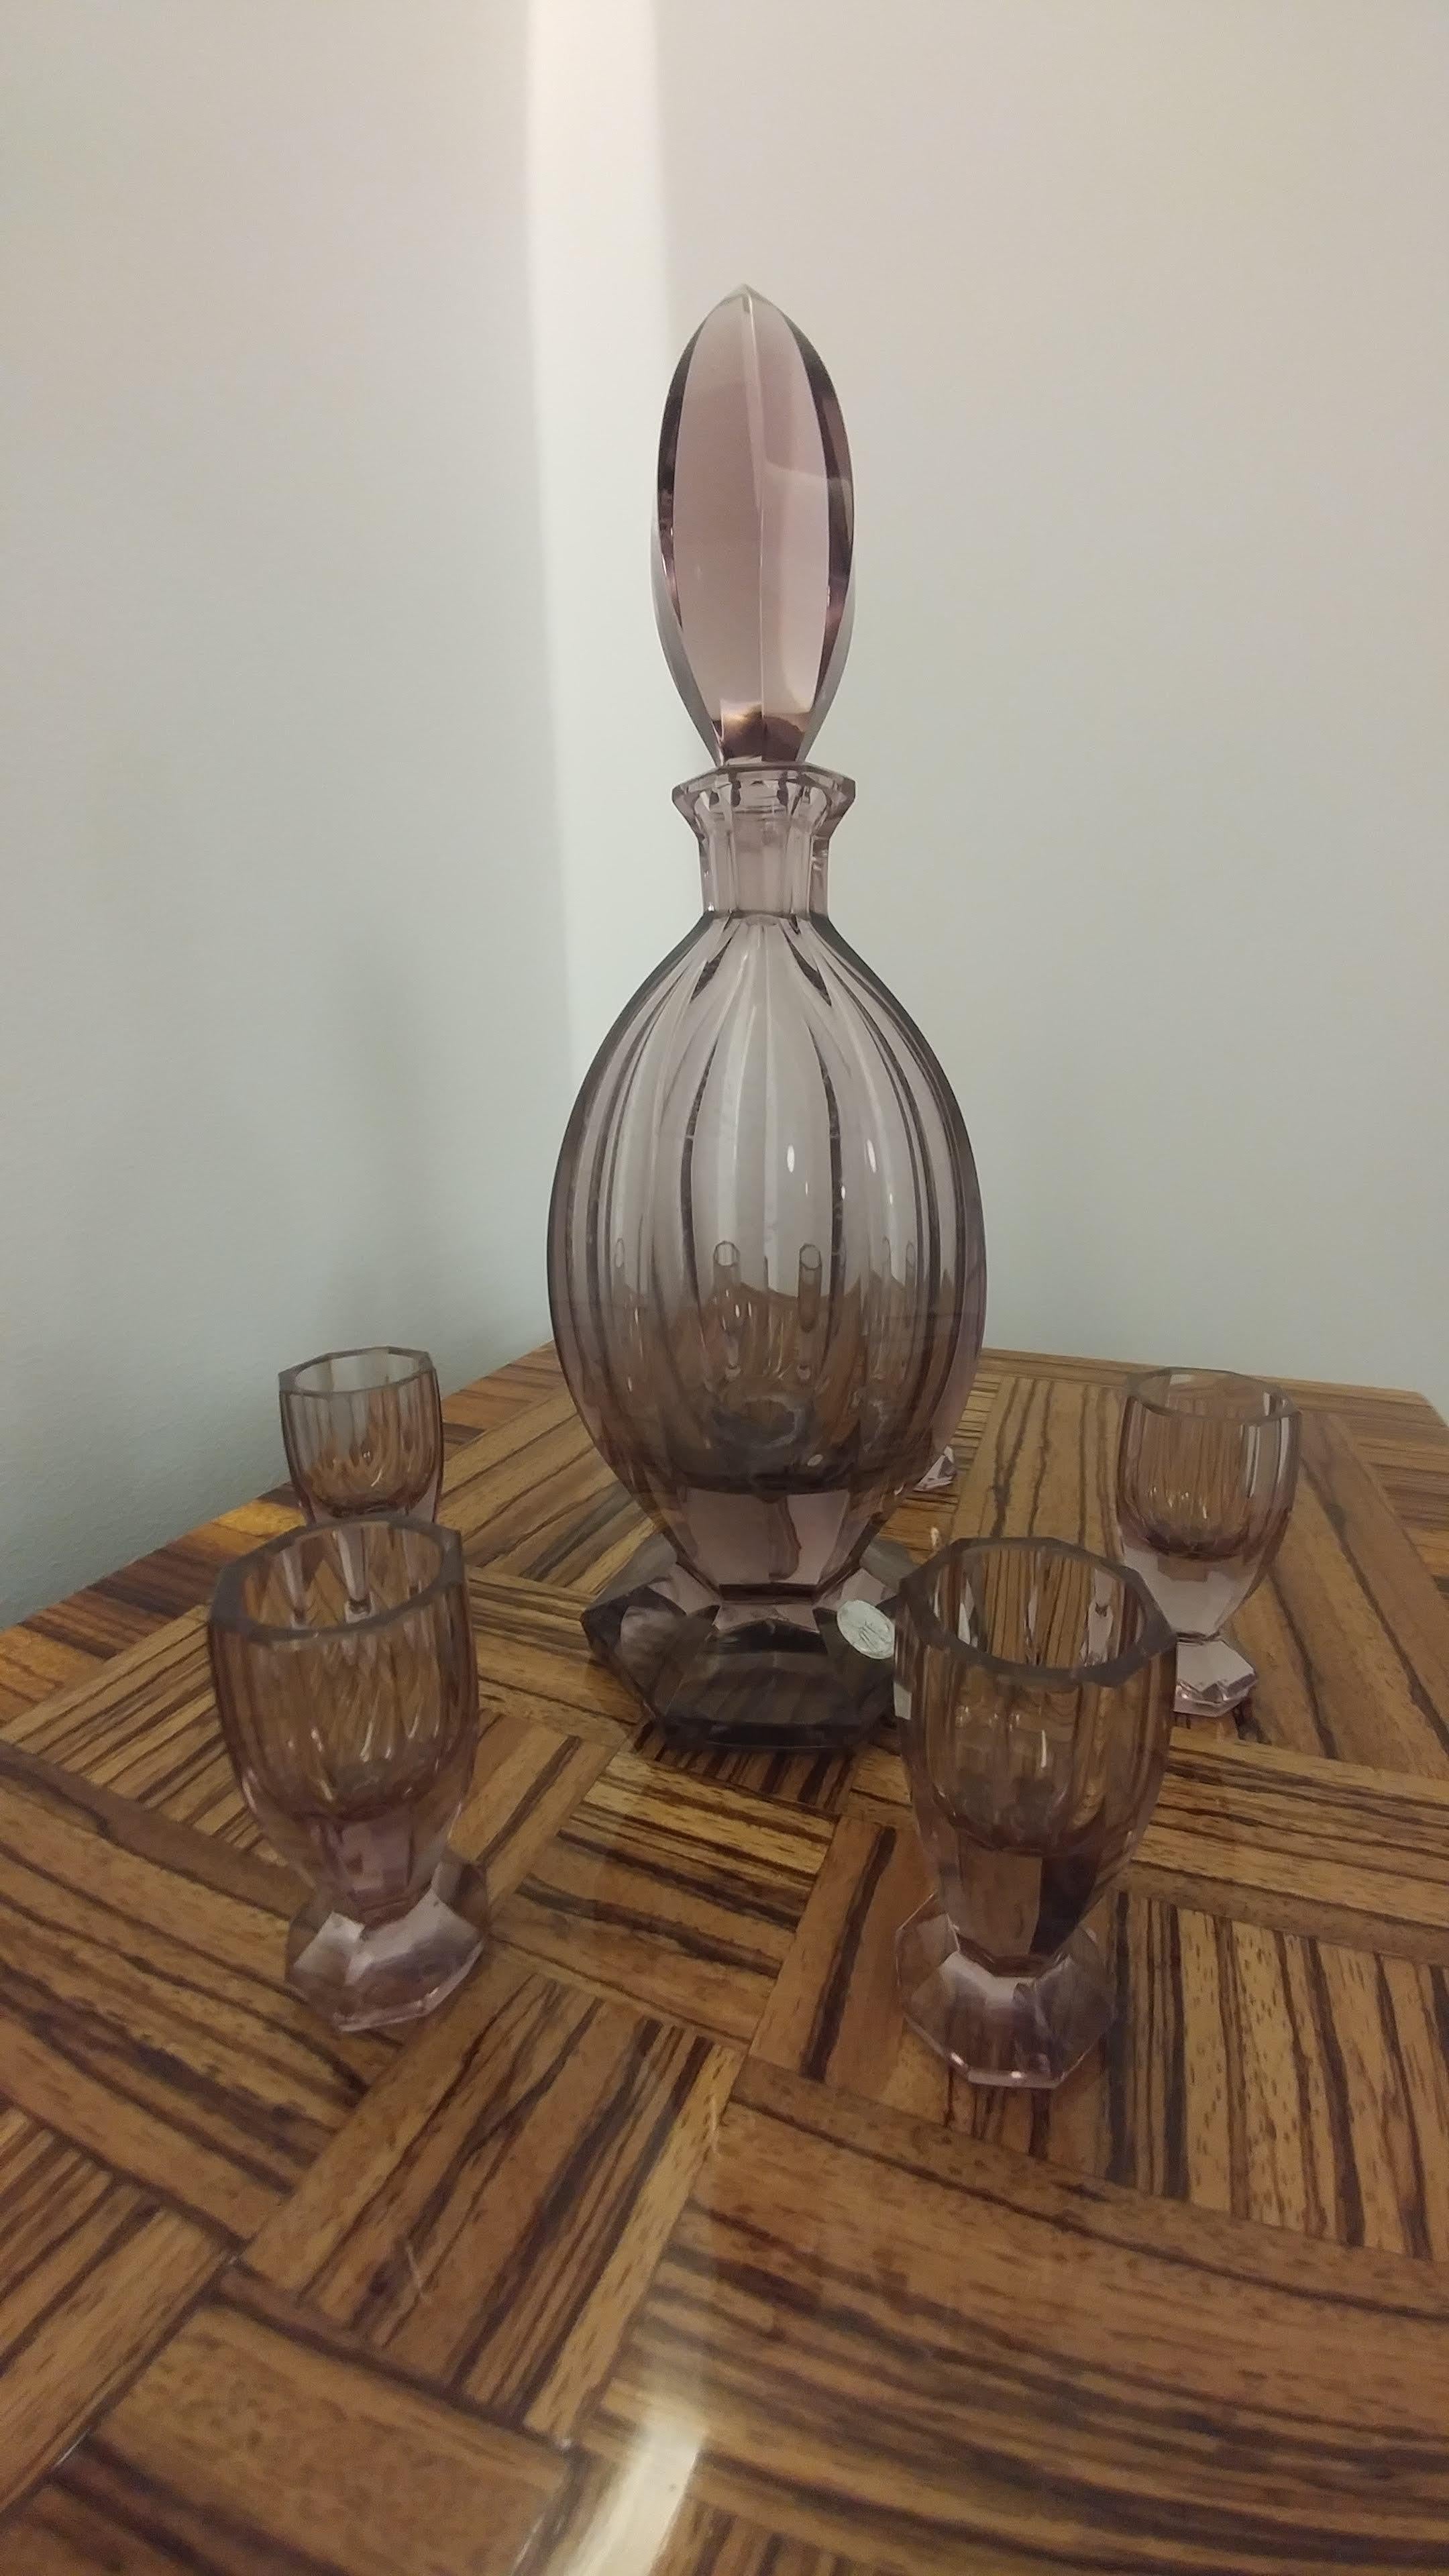 I offer you a classic Art Deco set of a decanter and 6 glasses - produced in the 1930s in Karlsbad (today's Karlove Vary in the Czech Republic) in the prestigious Ludwik Moser crystal glassworks, which supplied the royal courts of Europe and Asia